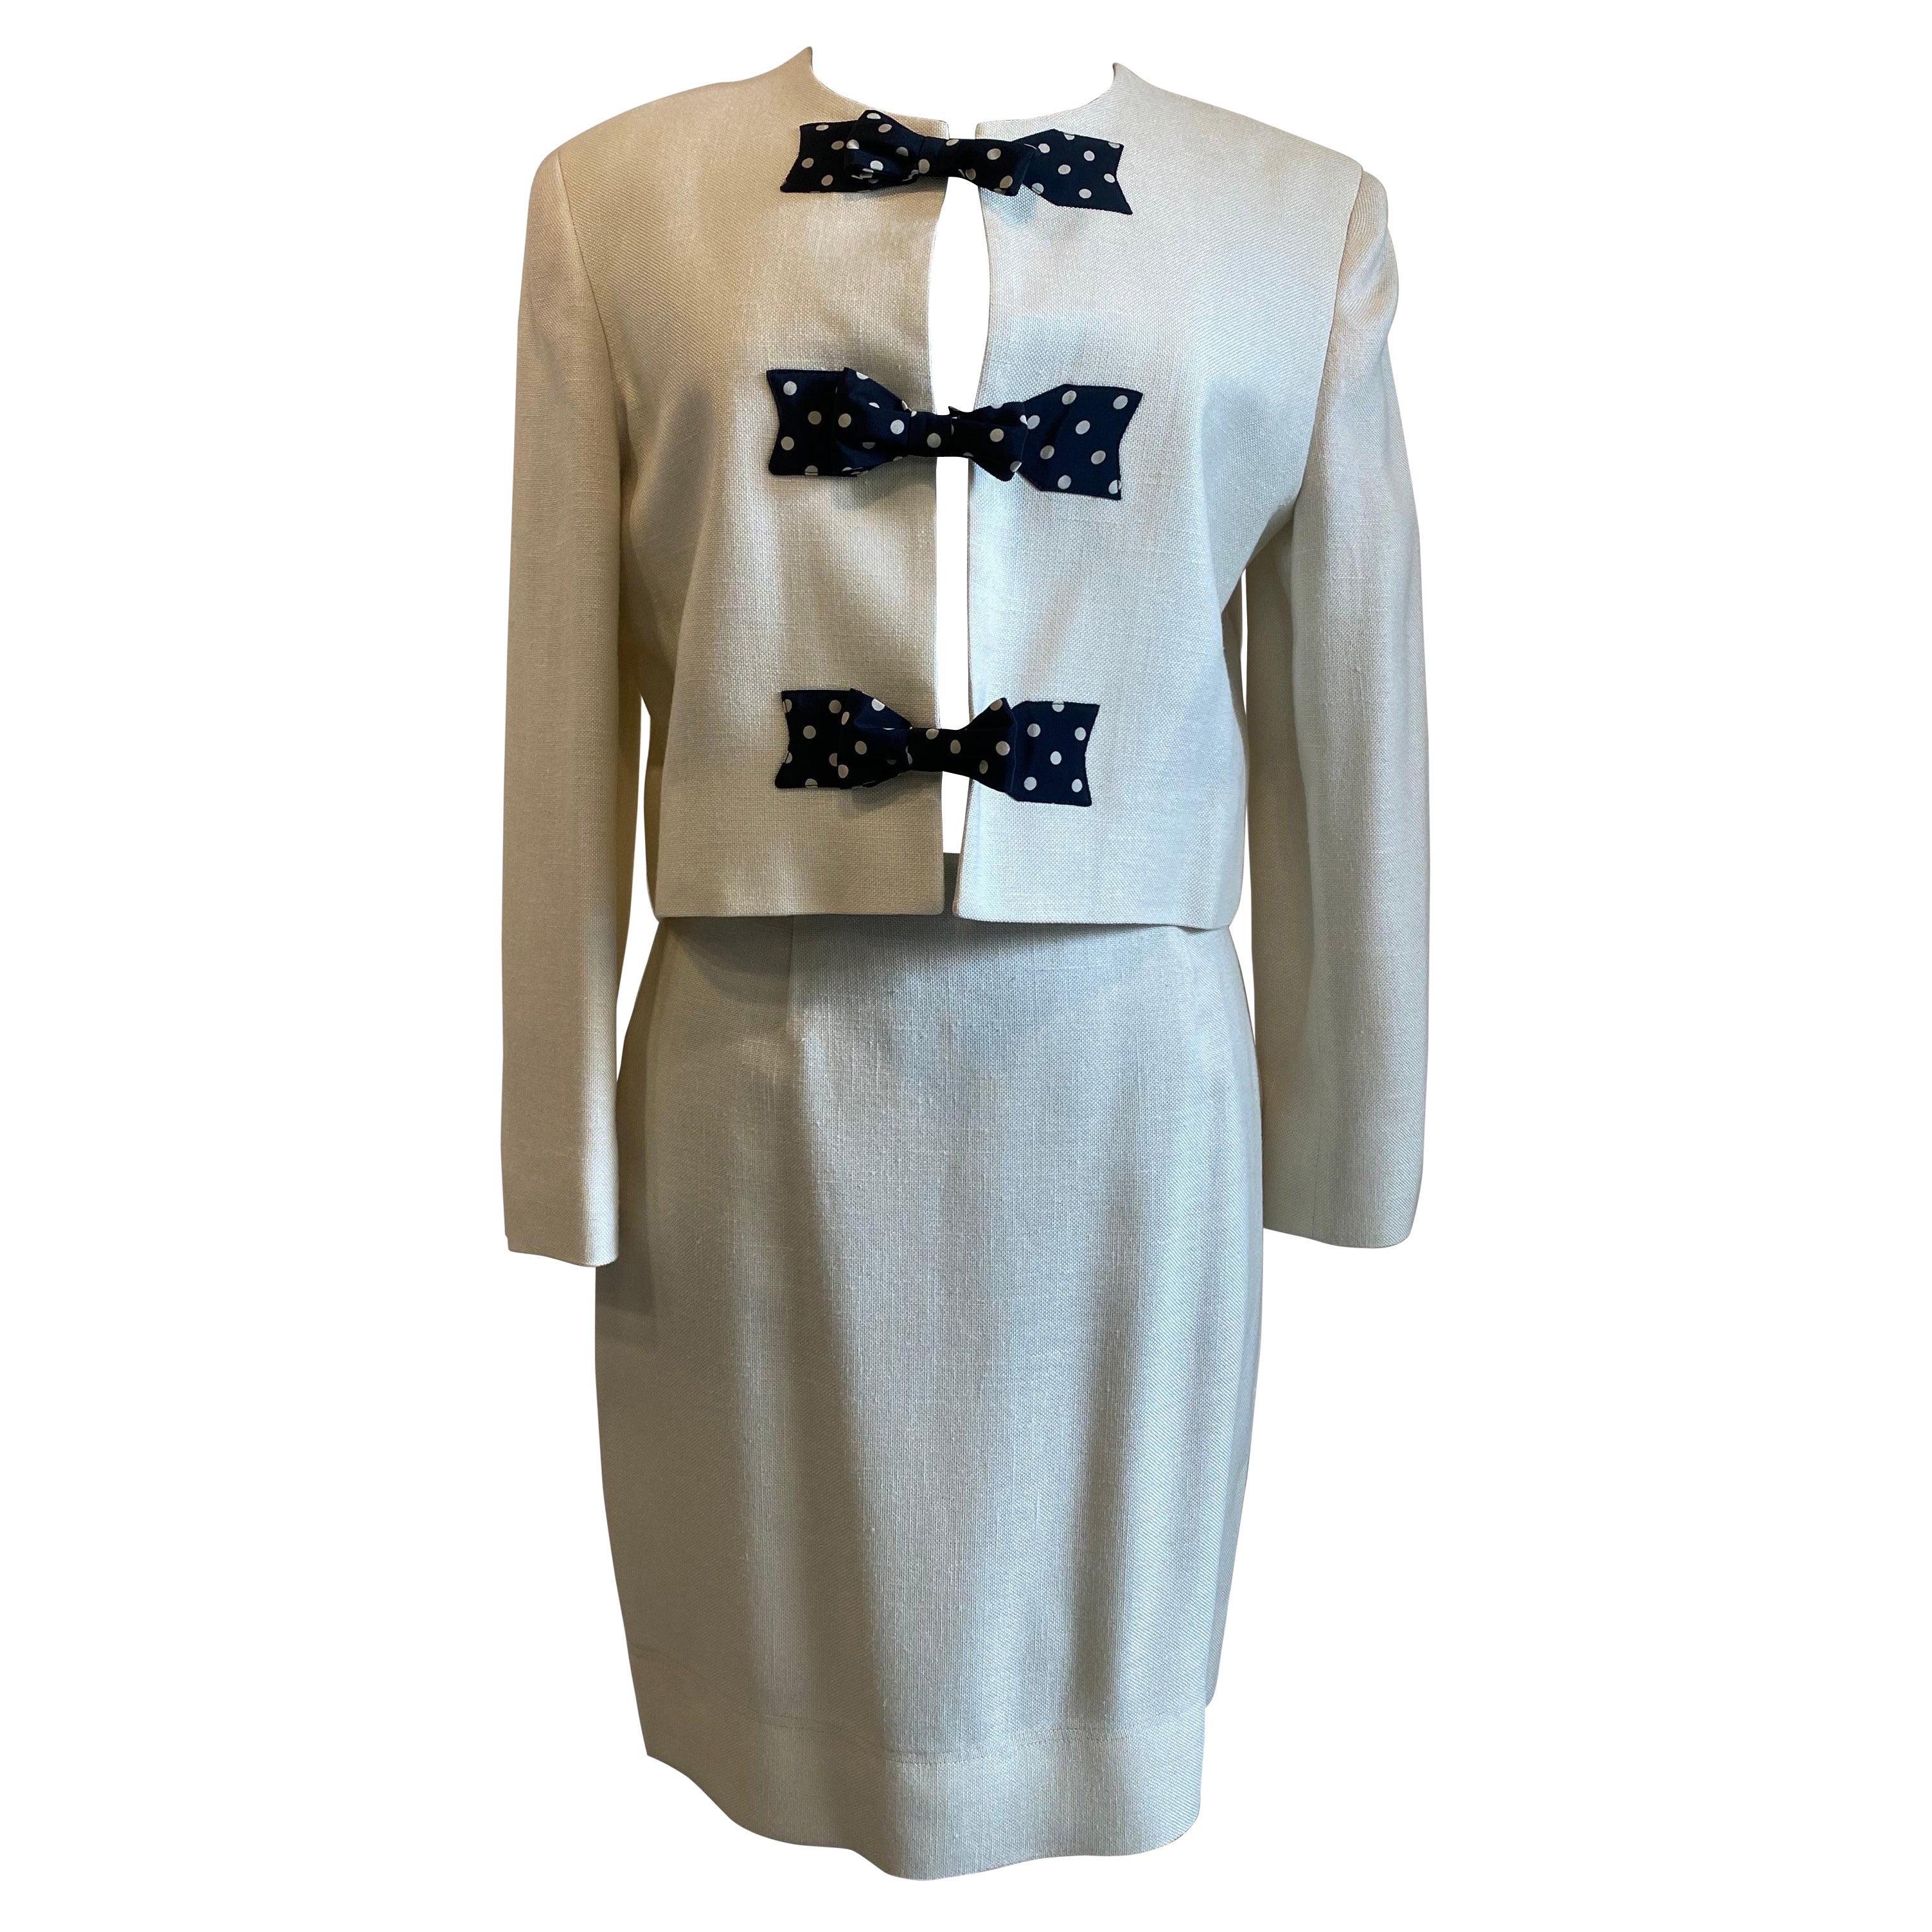 Costume Moschino Cheap and Chic en vente